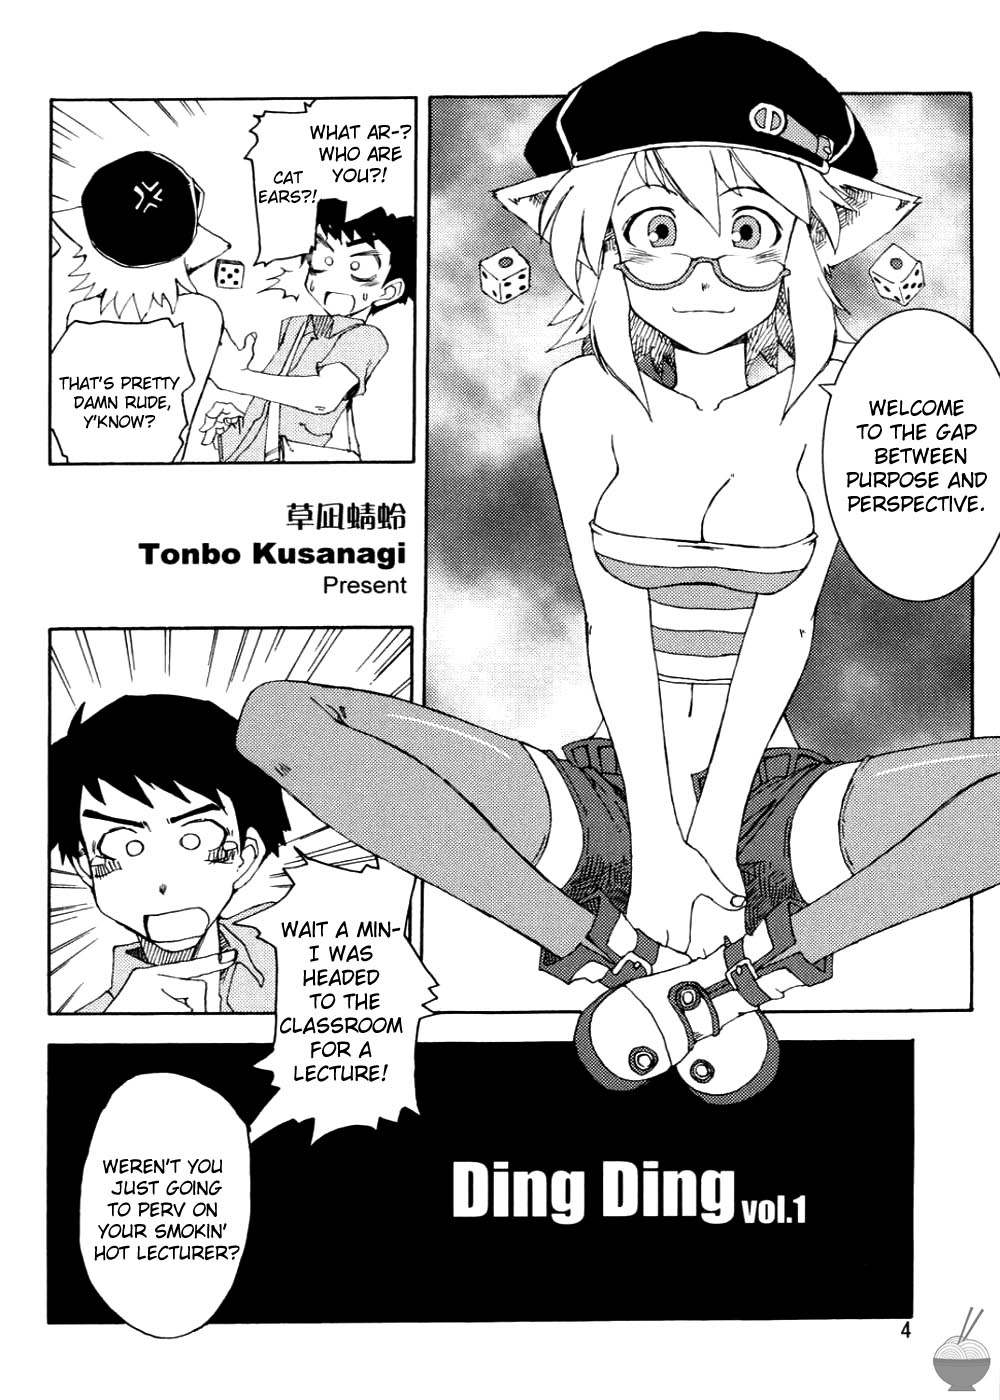 Windy Wing [Tonbo Kusangi] DiNG DiNG 1 Complete! [English] [Soba-Scans] [WiNDY WiNG (草凪蜻蛉)] DiNG DiNG ① Complete! [英訳]